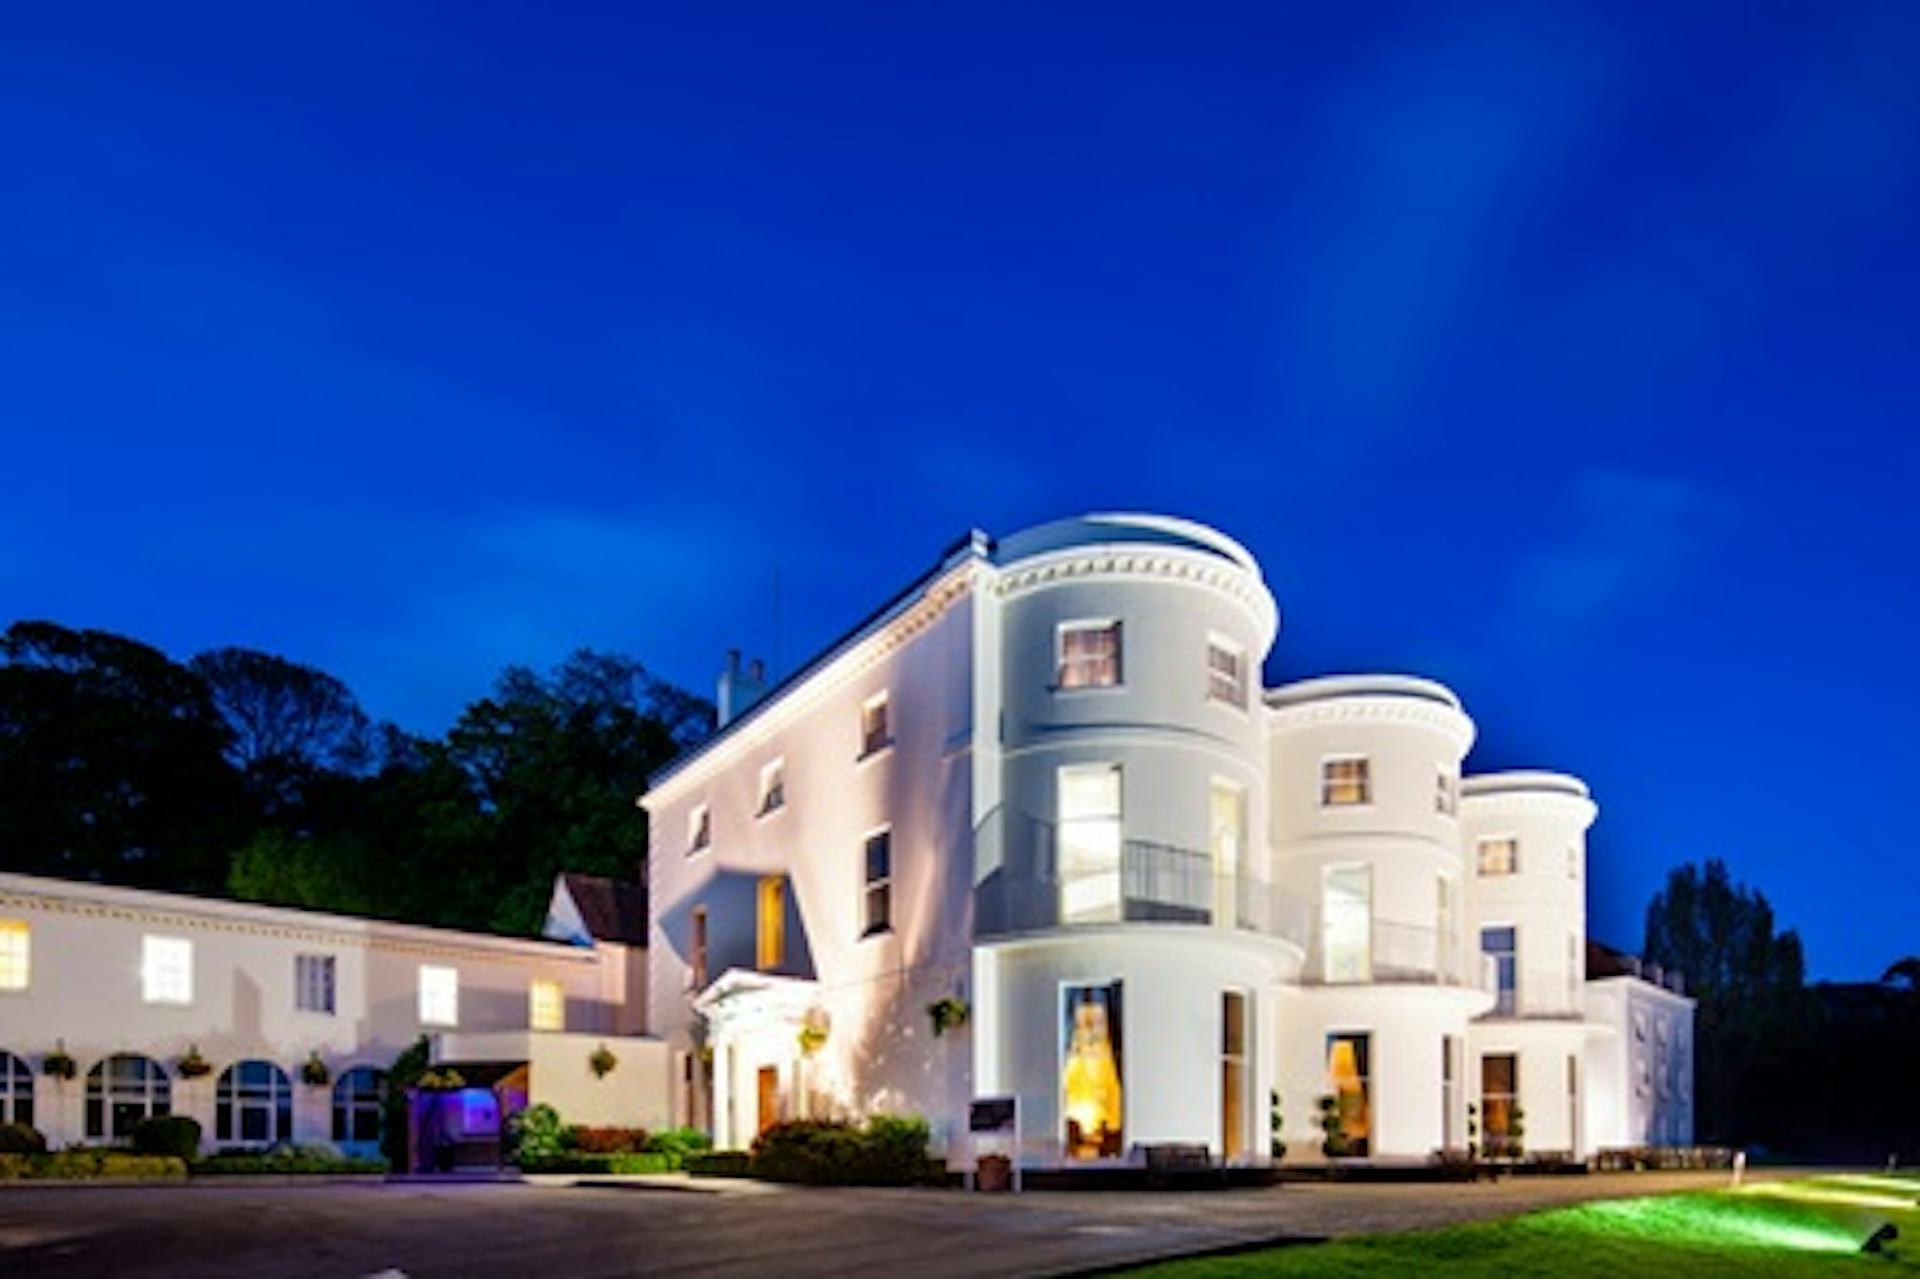 Two Night Break for Two at the Bowden Hall Hotel, Gloucester